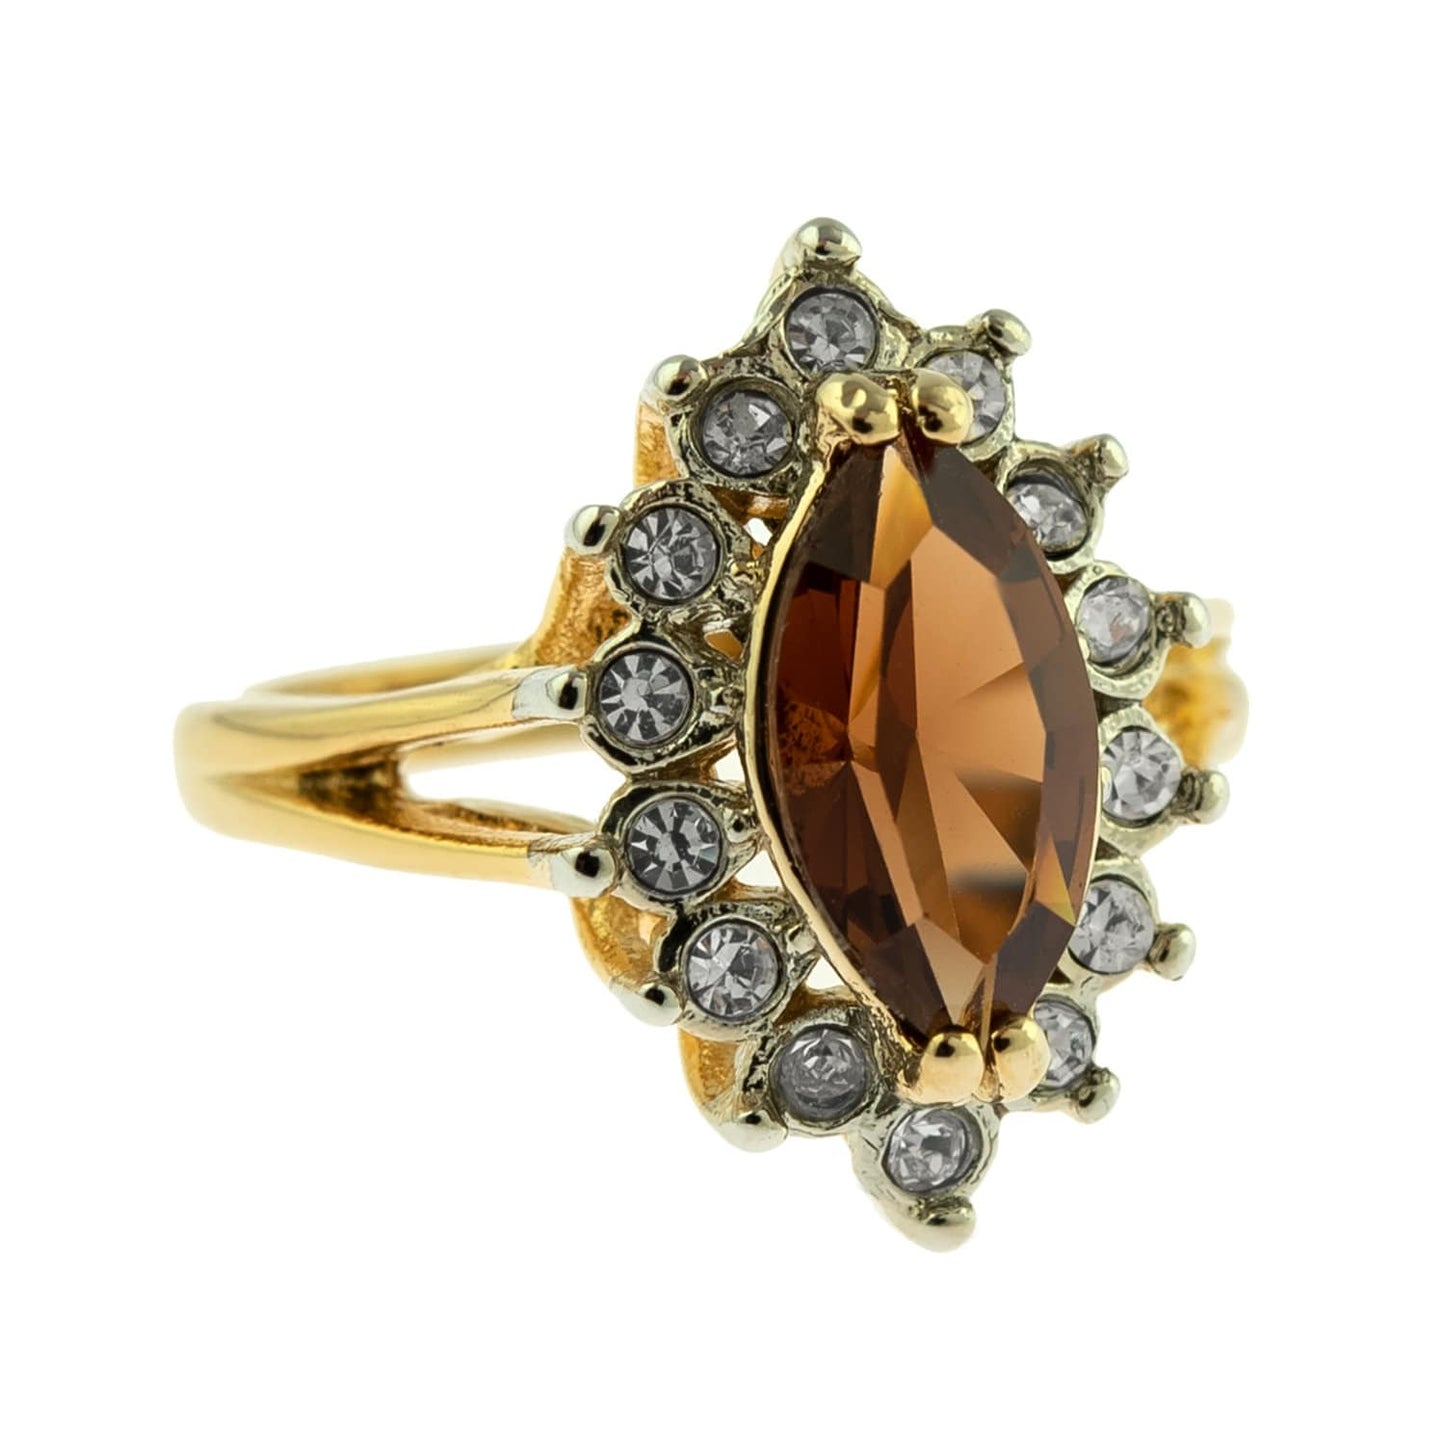 Vintage Ring Smoke Topaz and Clear Swarovski Crystals 18k Gold Plated Antique Womans Jewelry Topaz #R1891 - Limited Stock - Never Worn